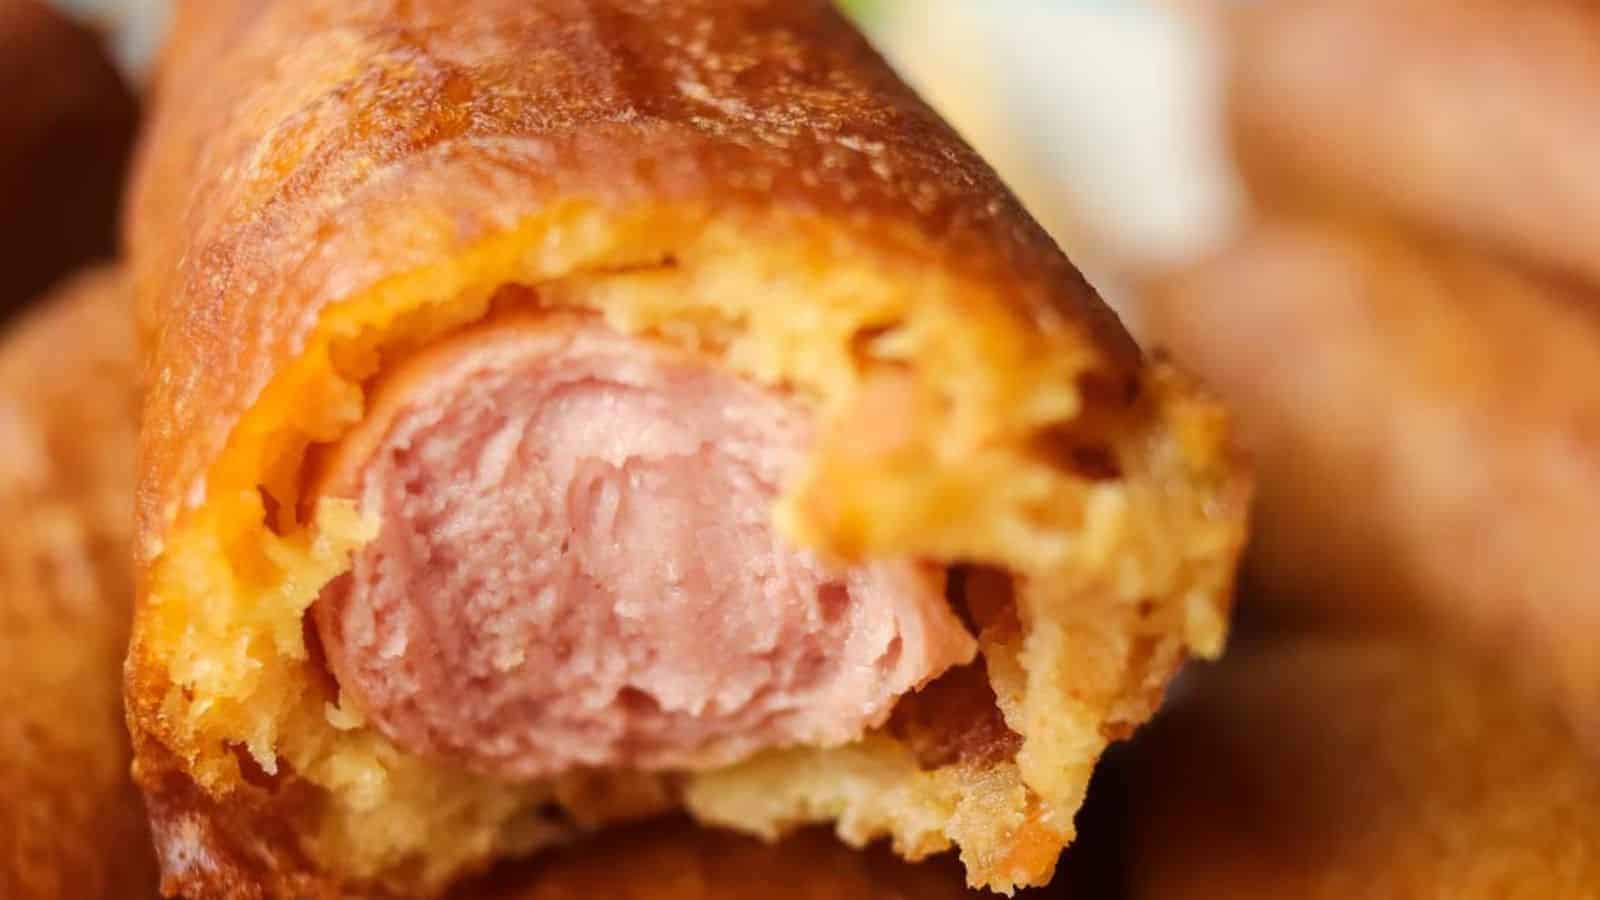 Close-up of a bitten corn dog showing its interior with a layer of crispy fried batter and a hot dog inside.